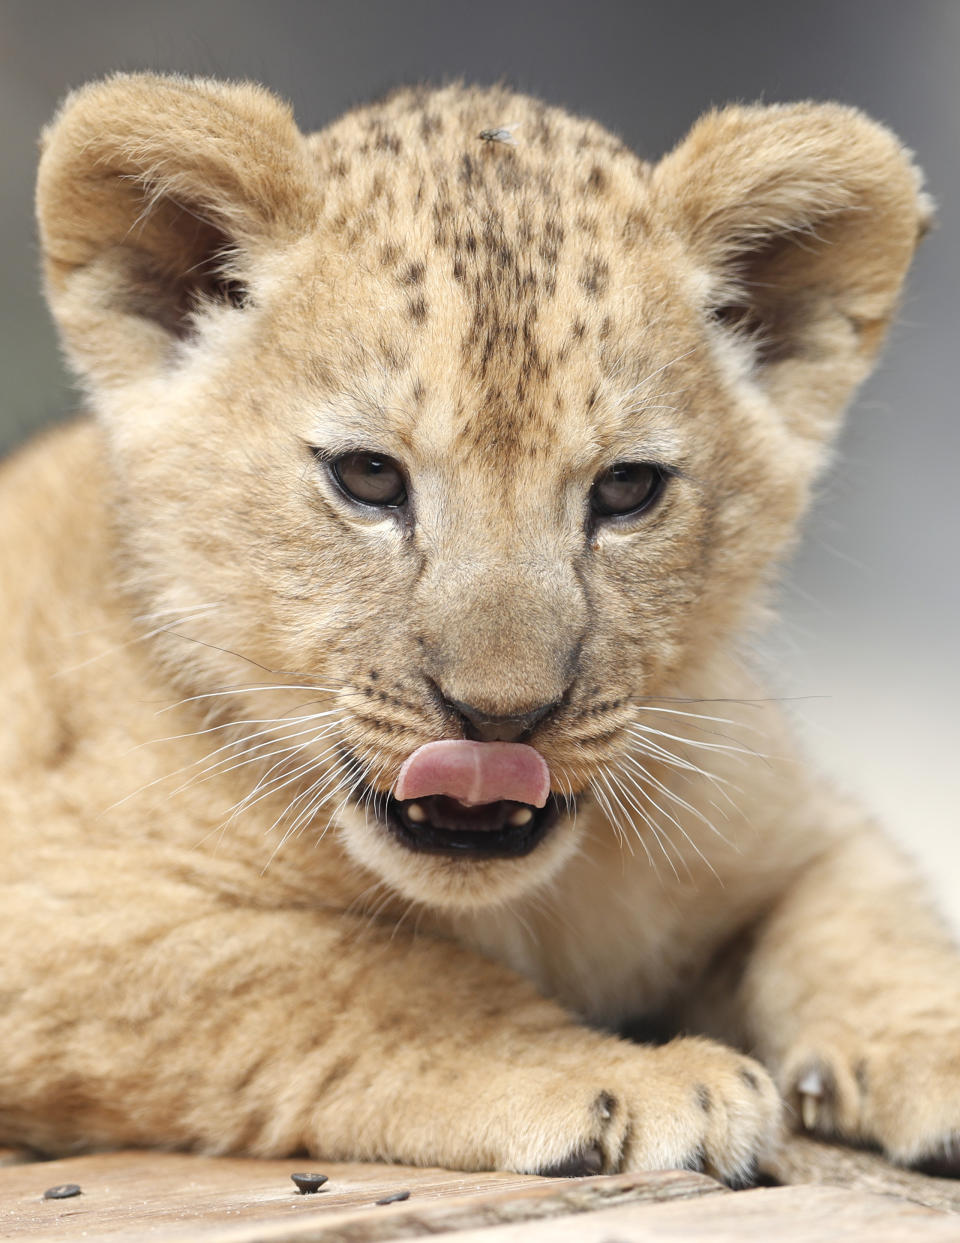 A Barbary lion cub rests in its enclosure at the zoo in Dvur Kralove, Czech Republic, Monday, July 8, 2019. Two Barbary lion cubs have been born in a Czech zoo, a welcome addition to a small surviving population of a rare majestic lion subspecies that has been extinct in the wild. A male and a female that have yet to be named were born on May 10 in the Dvur Kralove safari park. (AP Photo/Petr David Josek)